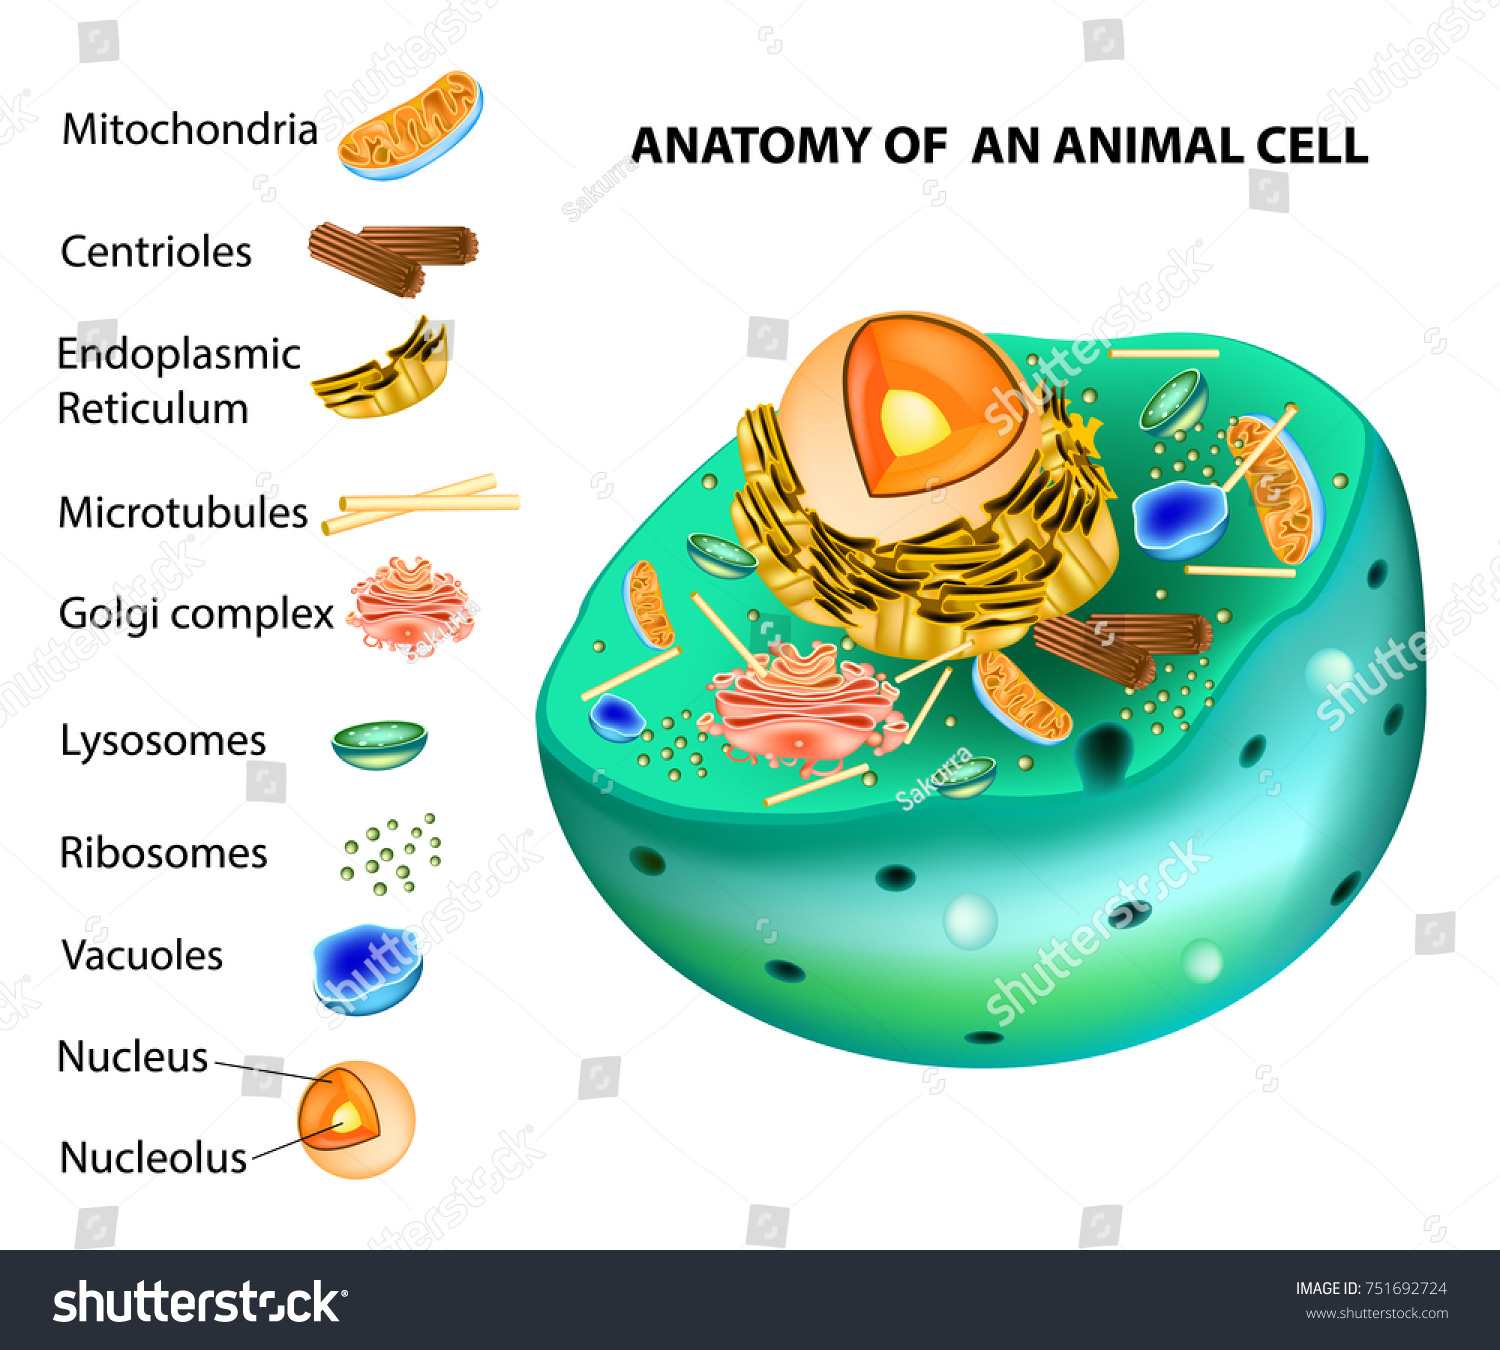 animal-cell-anatomy-animal-cell-structure-stock-vector-royalty-free